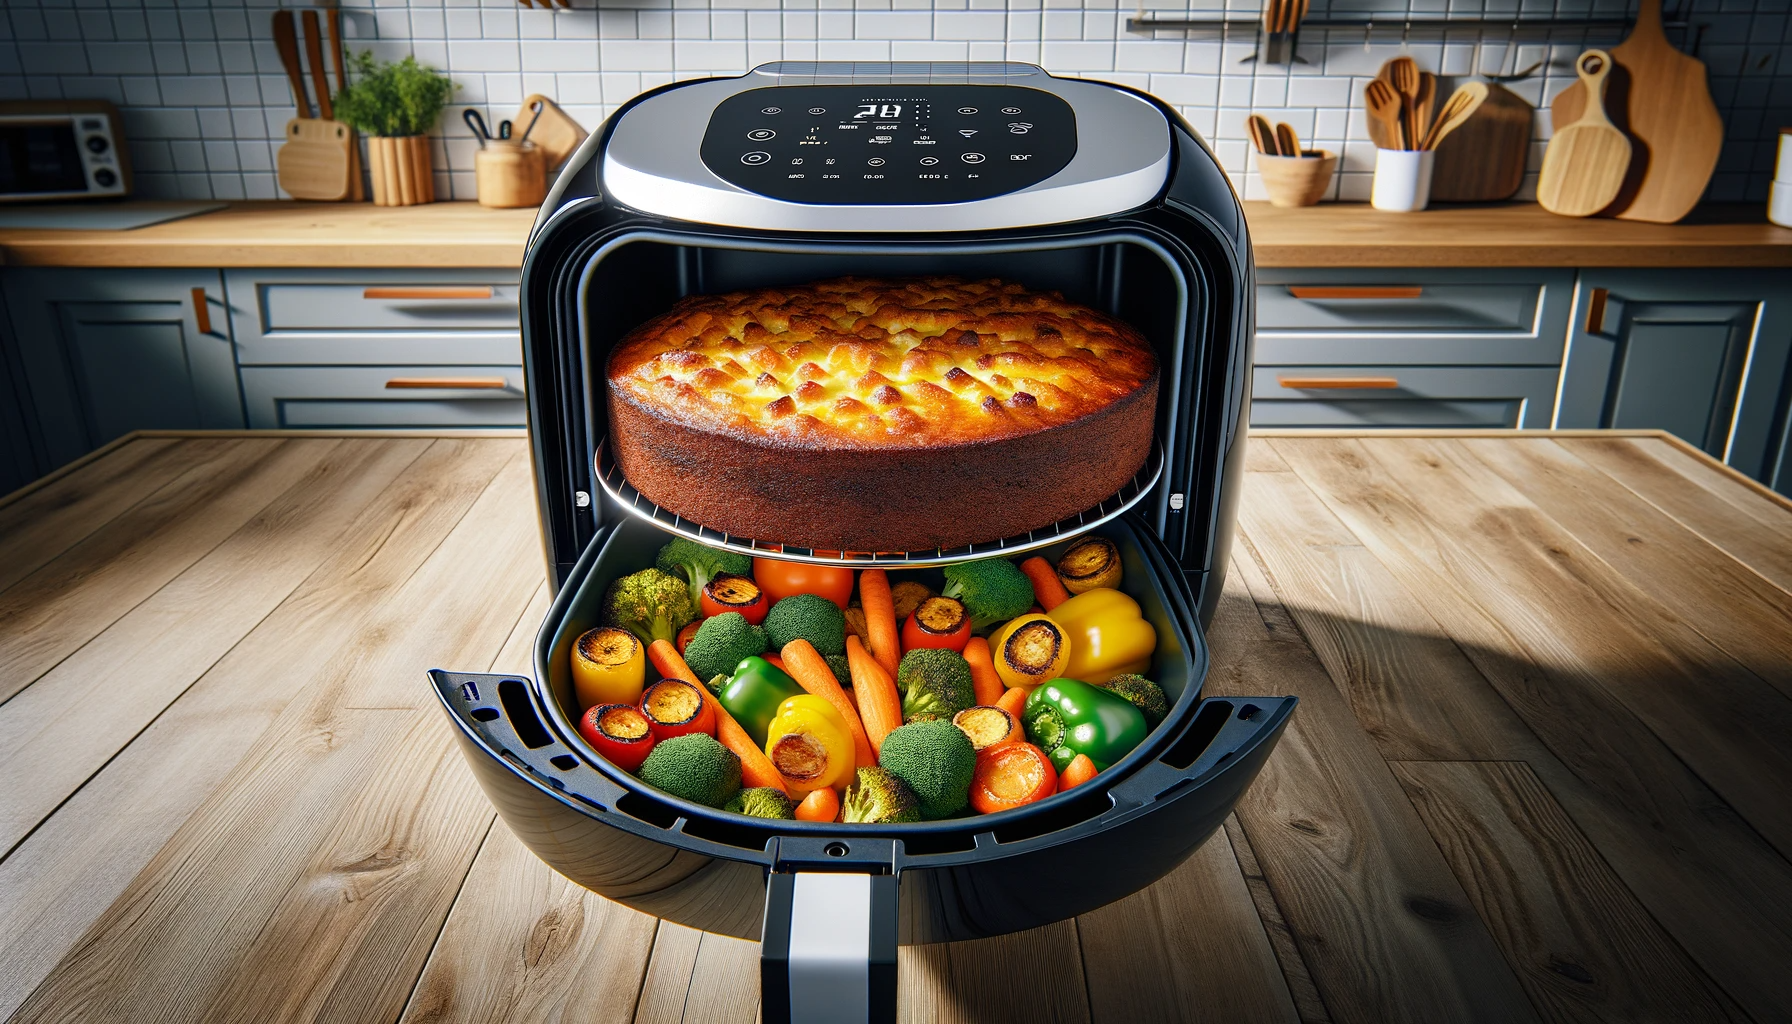 Oven-Style Air Fryers: Use Cases In Frying, Roasting, Grilling, Reheating & More